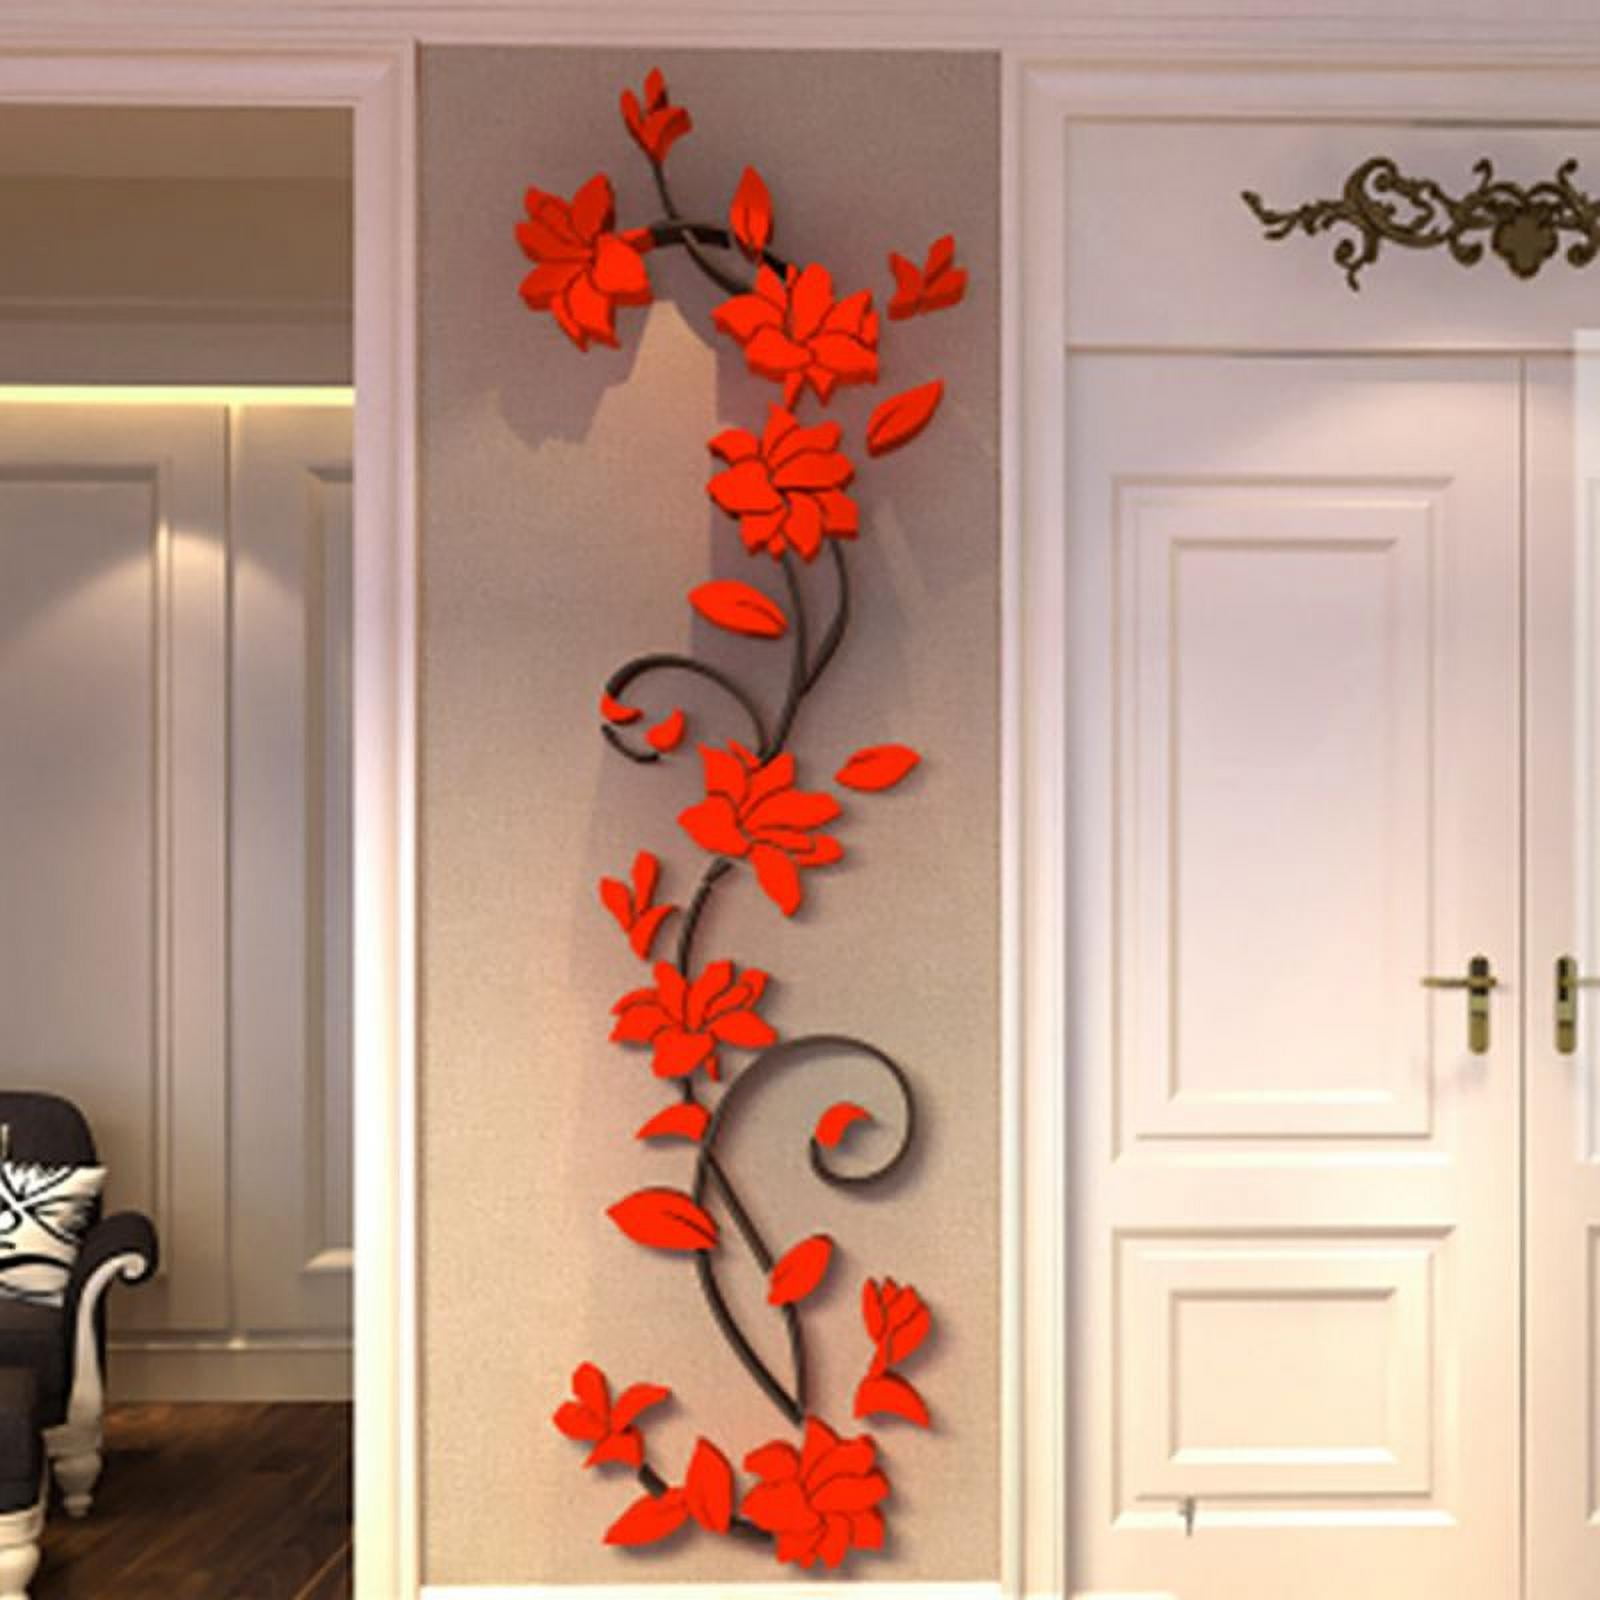 DIY Wall Sticker Decal Mural Vinyl Quote Home Room Decor Art 3D Flower Removable 